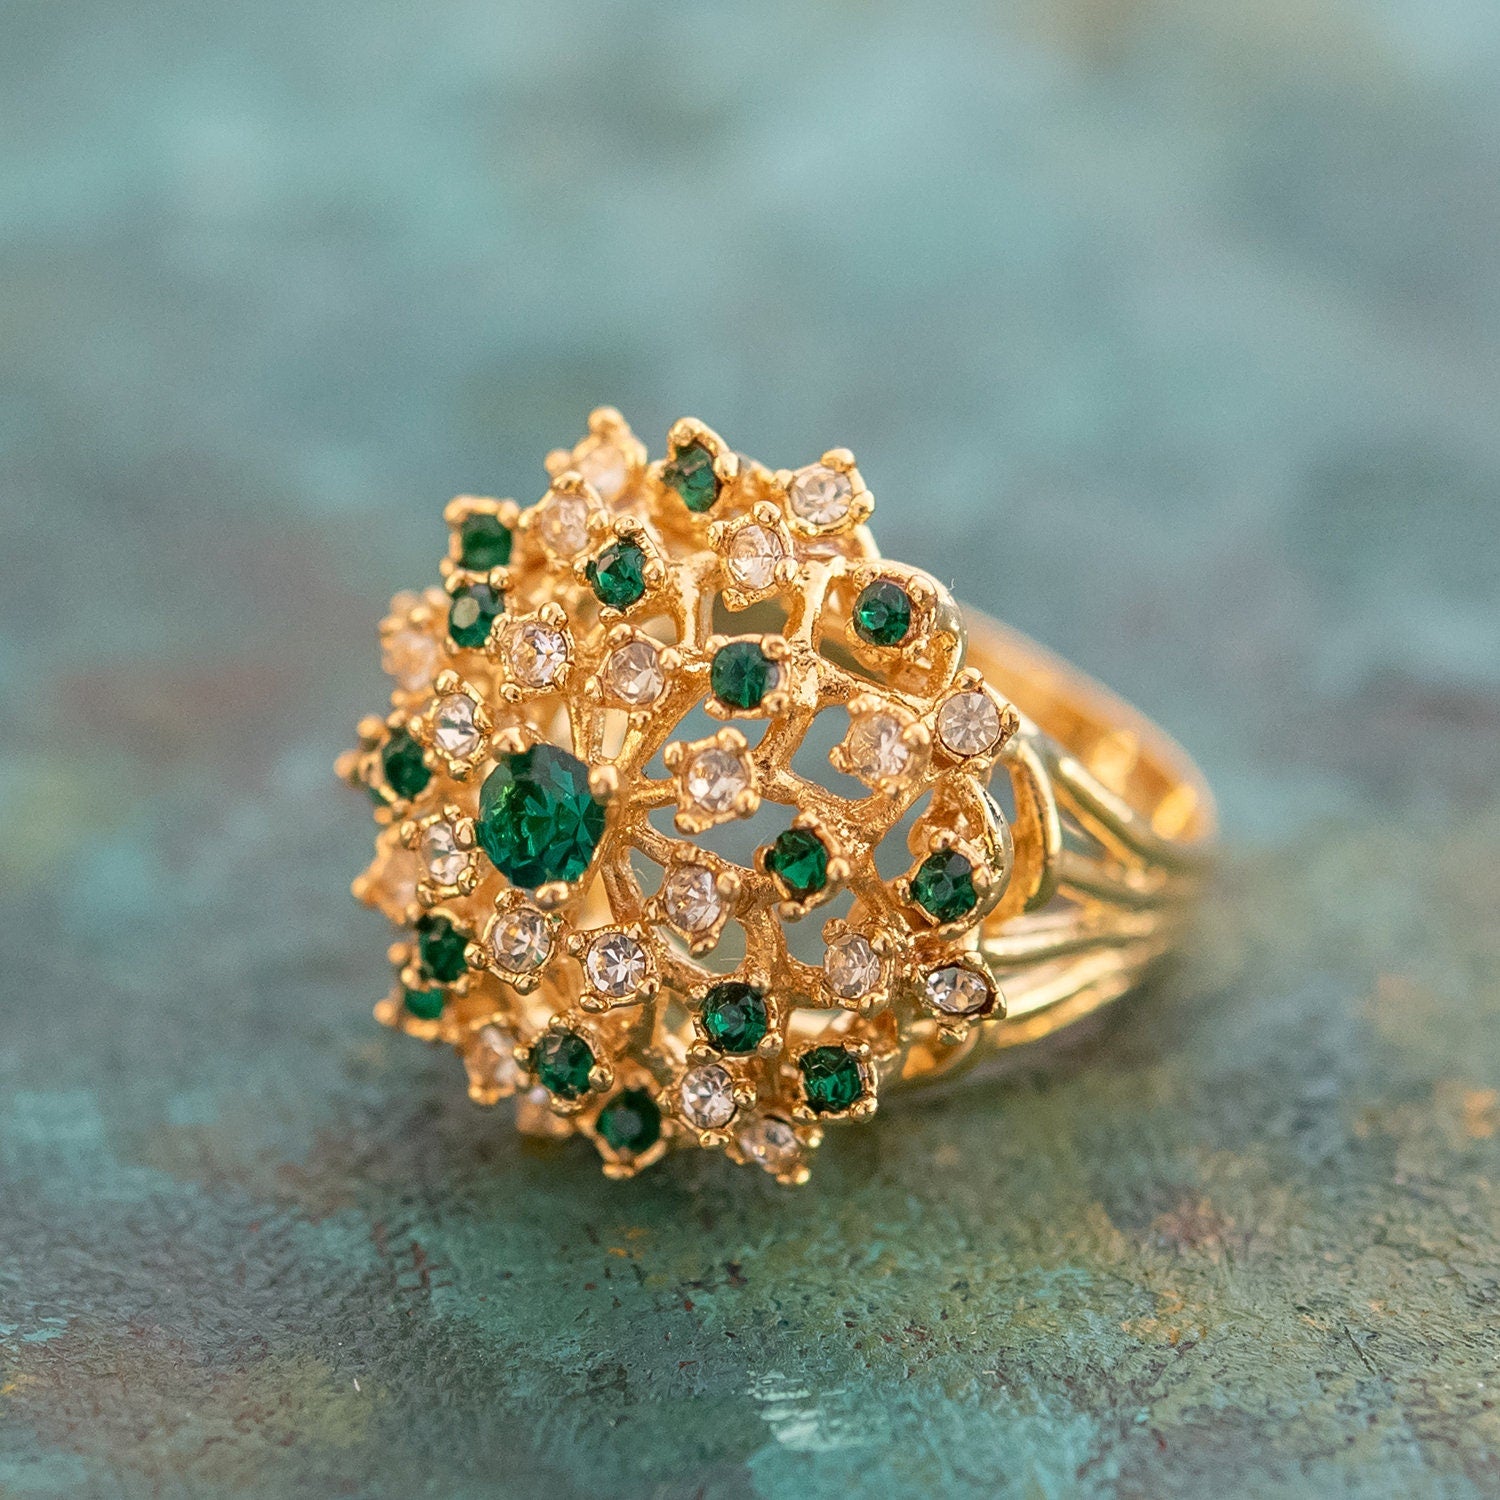 Vintage Ring Emerald and Clear Swarovski Crystal Burst Ring 18k Gold R195 Antique Womans Jewelry - Limited Stock - Never Worn